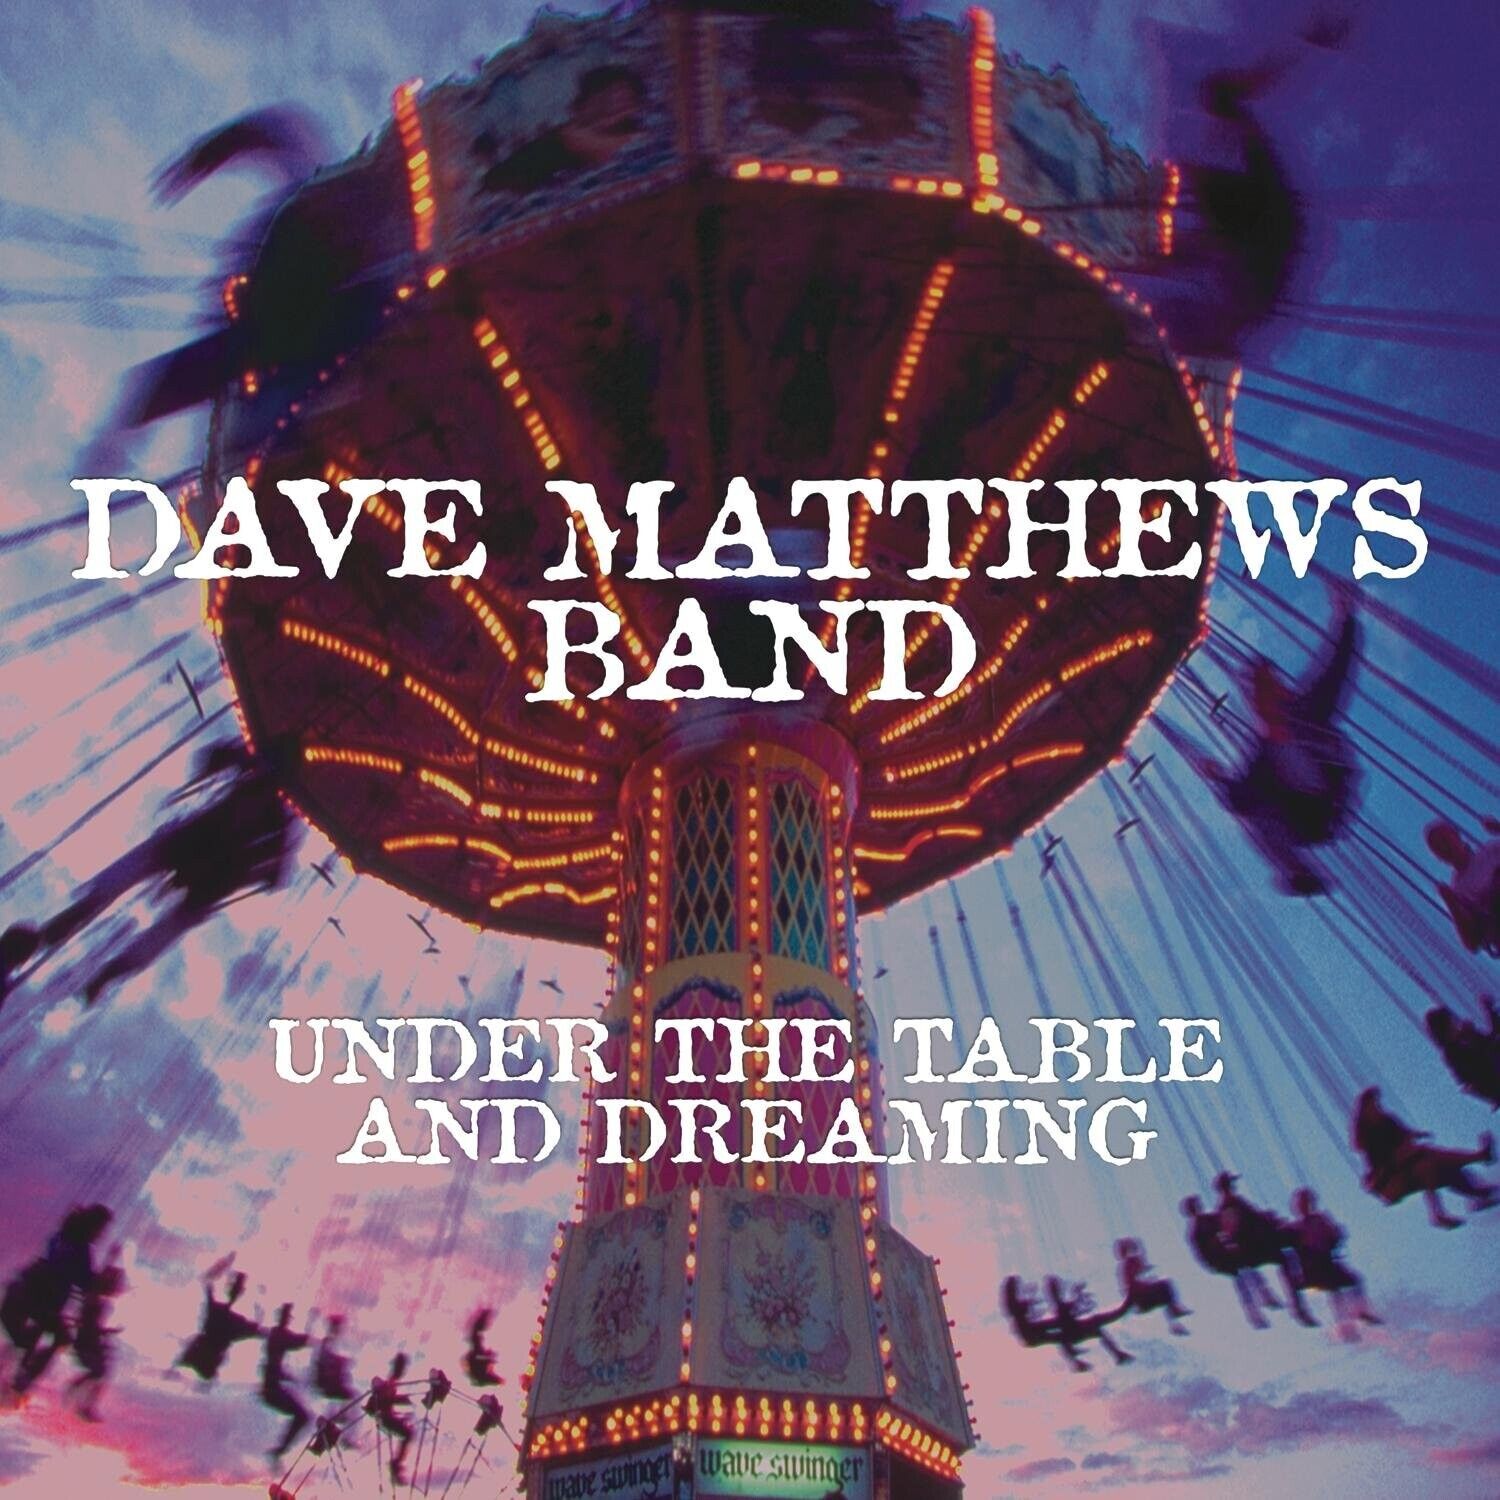 Dave Matthews Band - Under The Table And Dreaming - New Vinyl 2LP